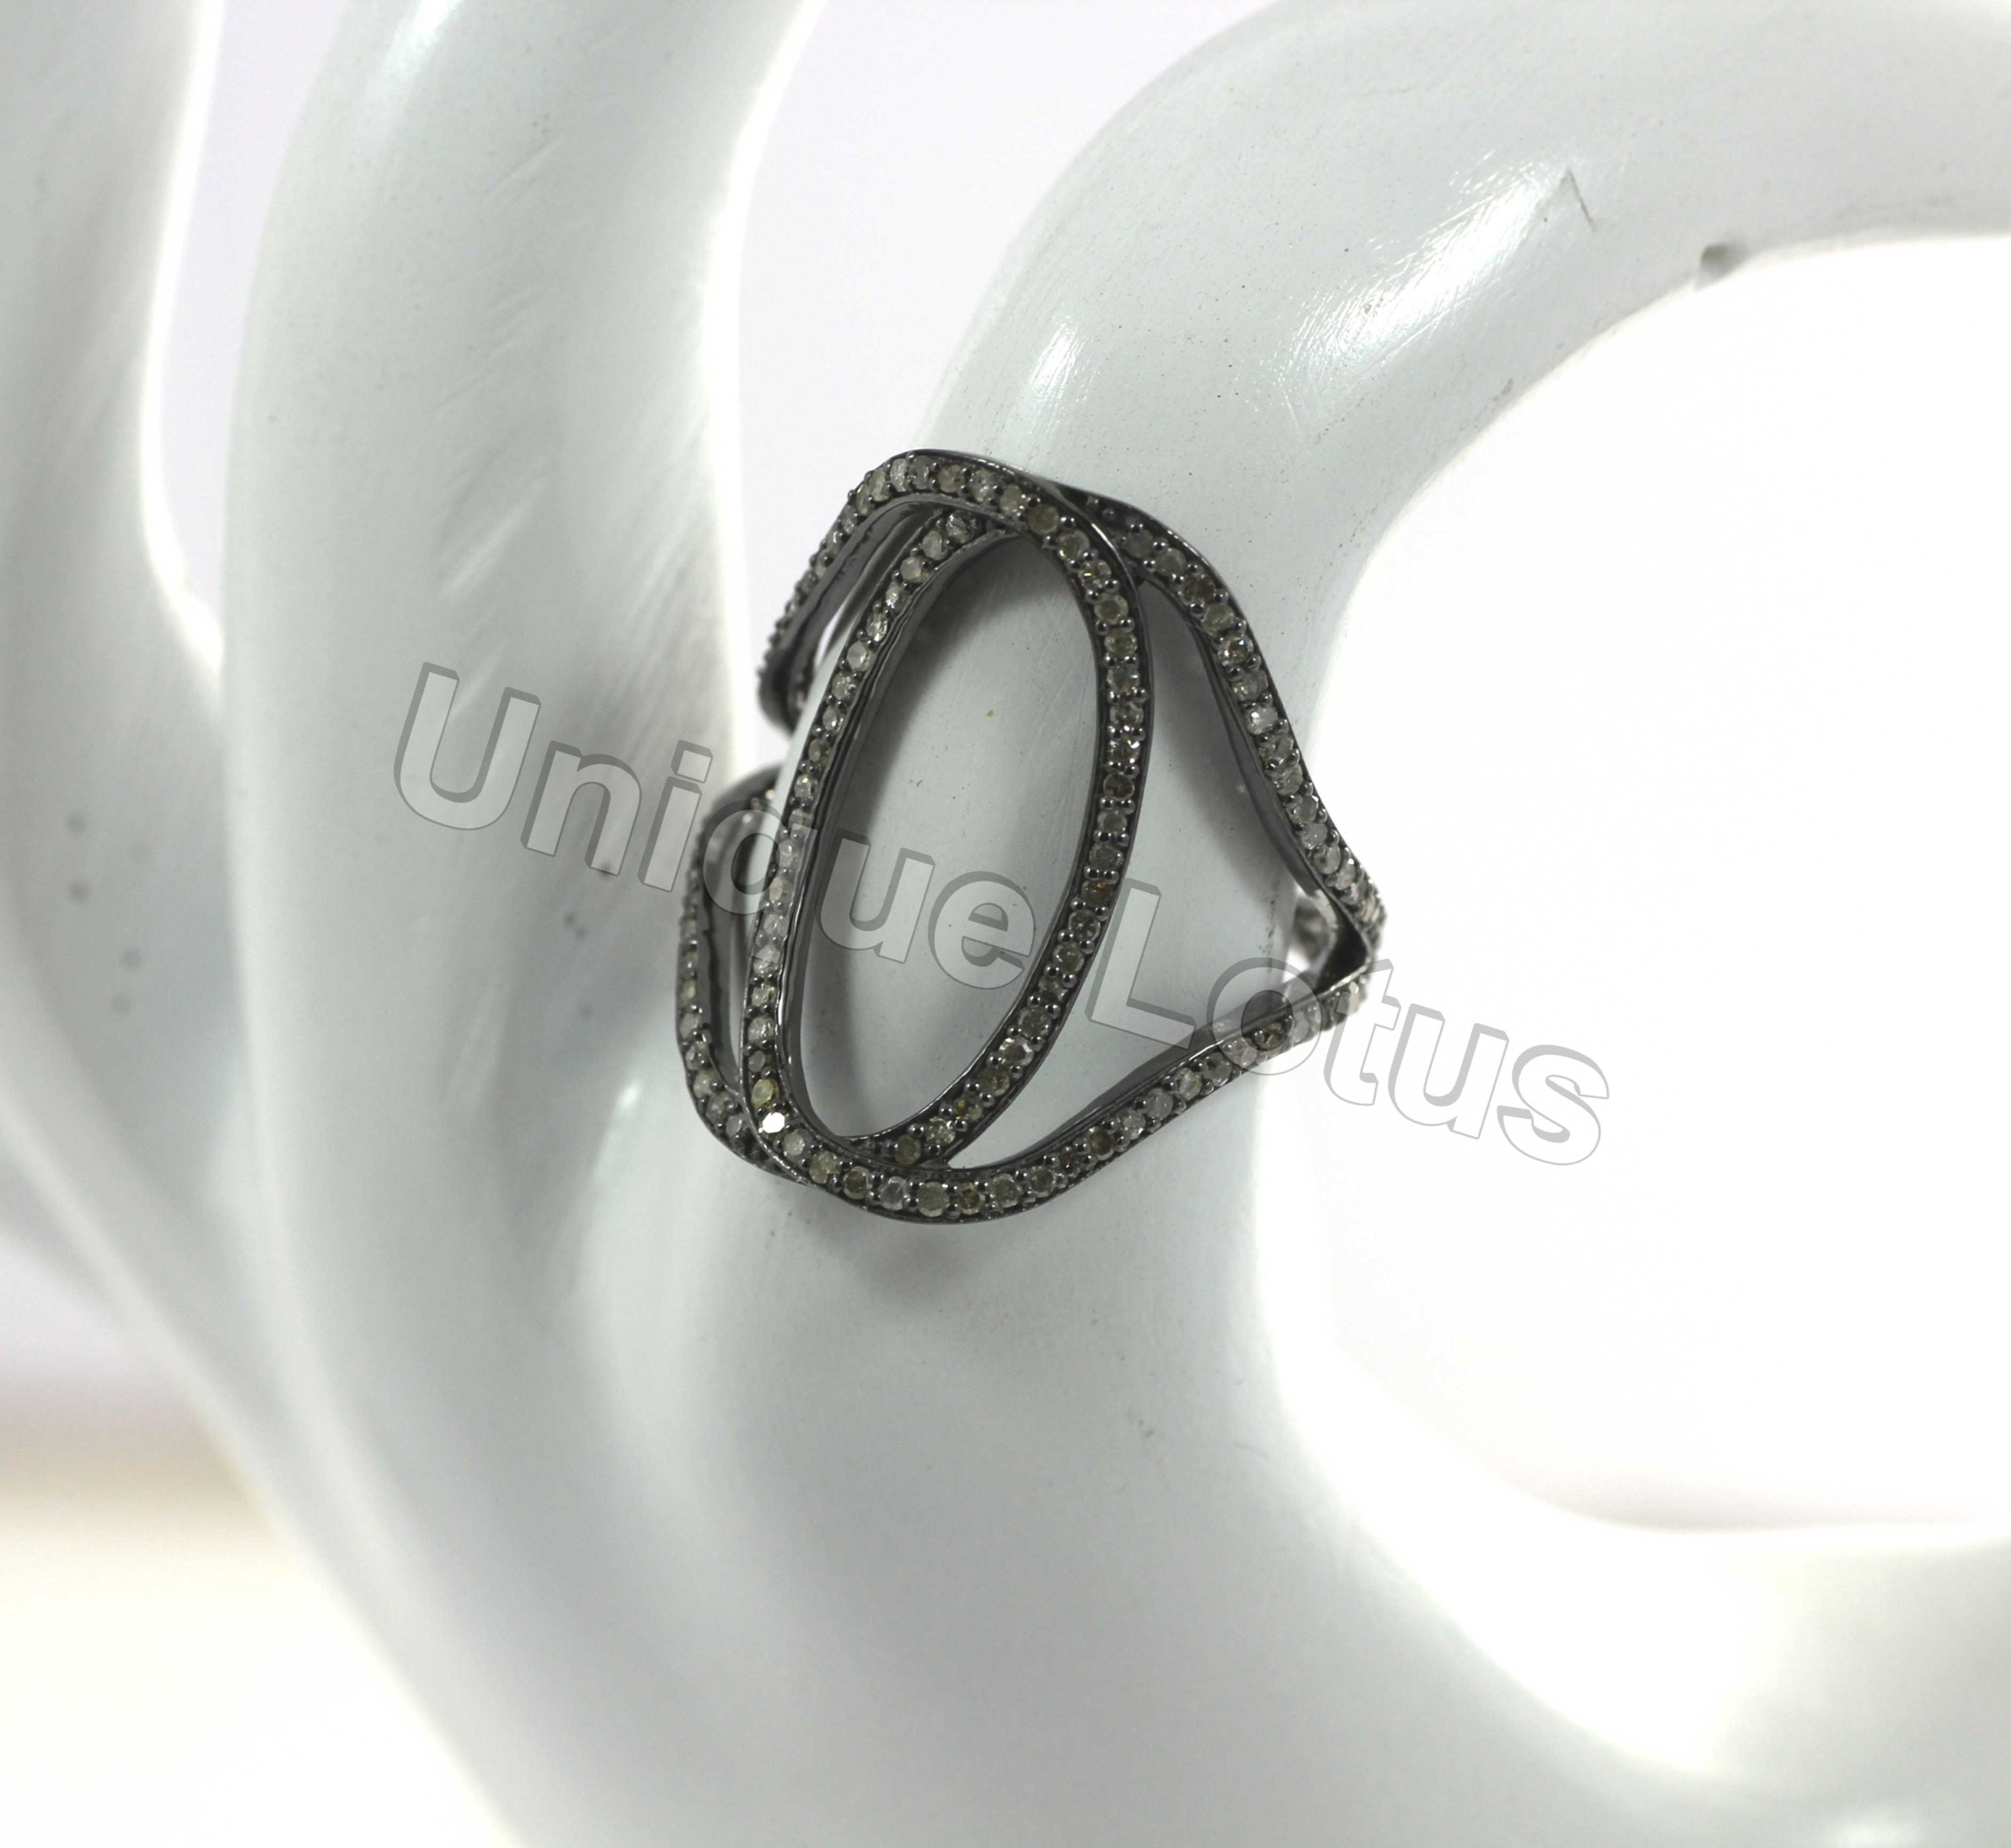 Silver Pave Diamond Ring .925 Oxidized Sterling Silver Diamond Ring Genuine handmade pave diamond Ring.